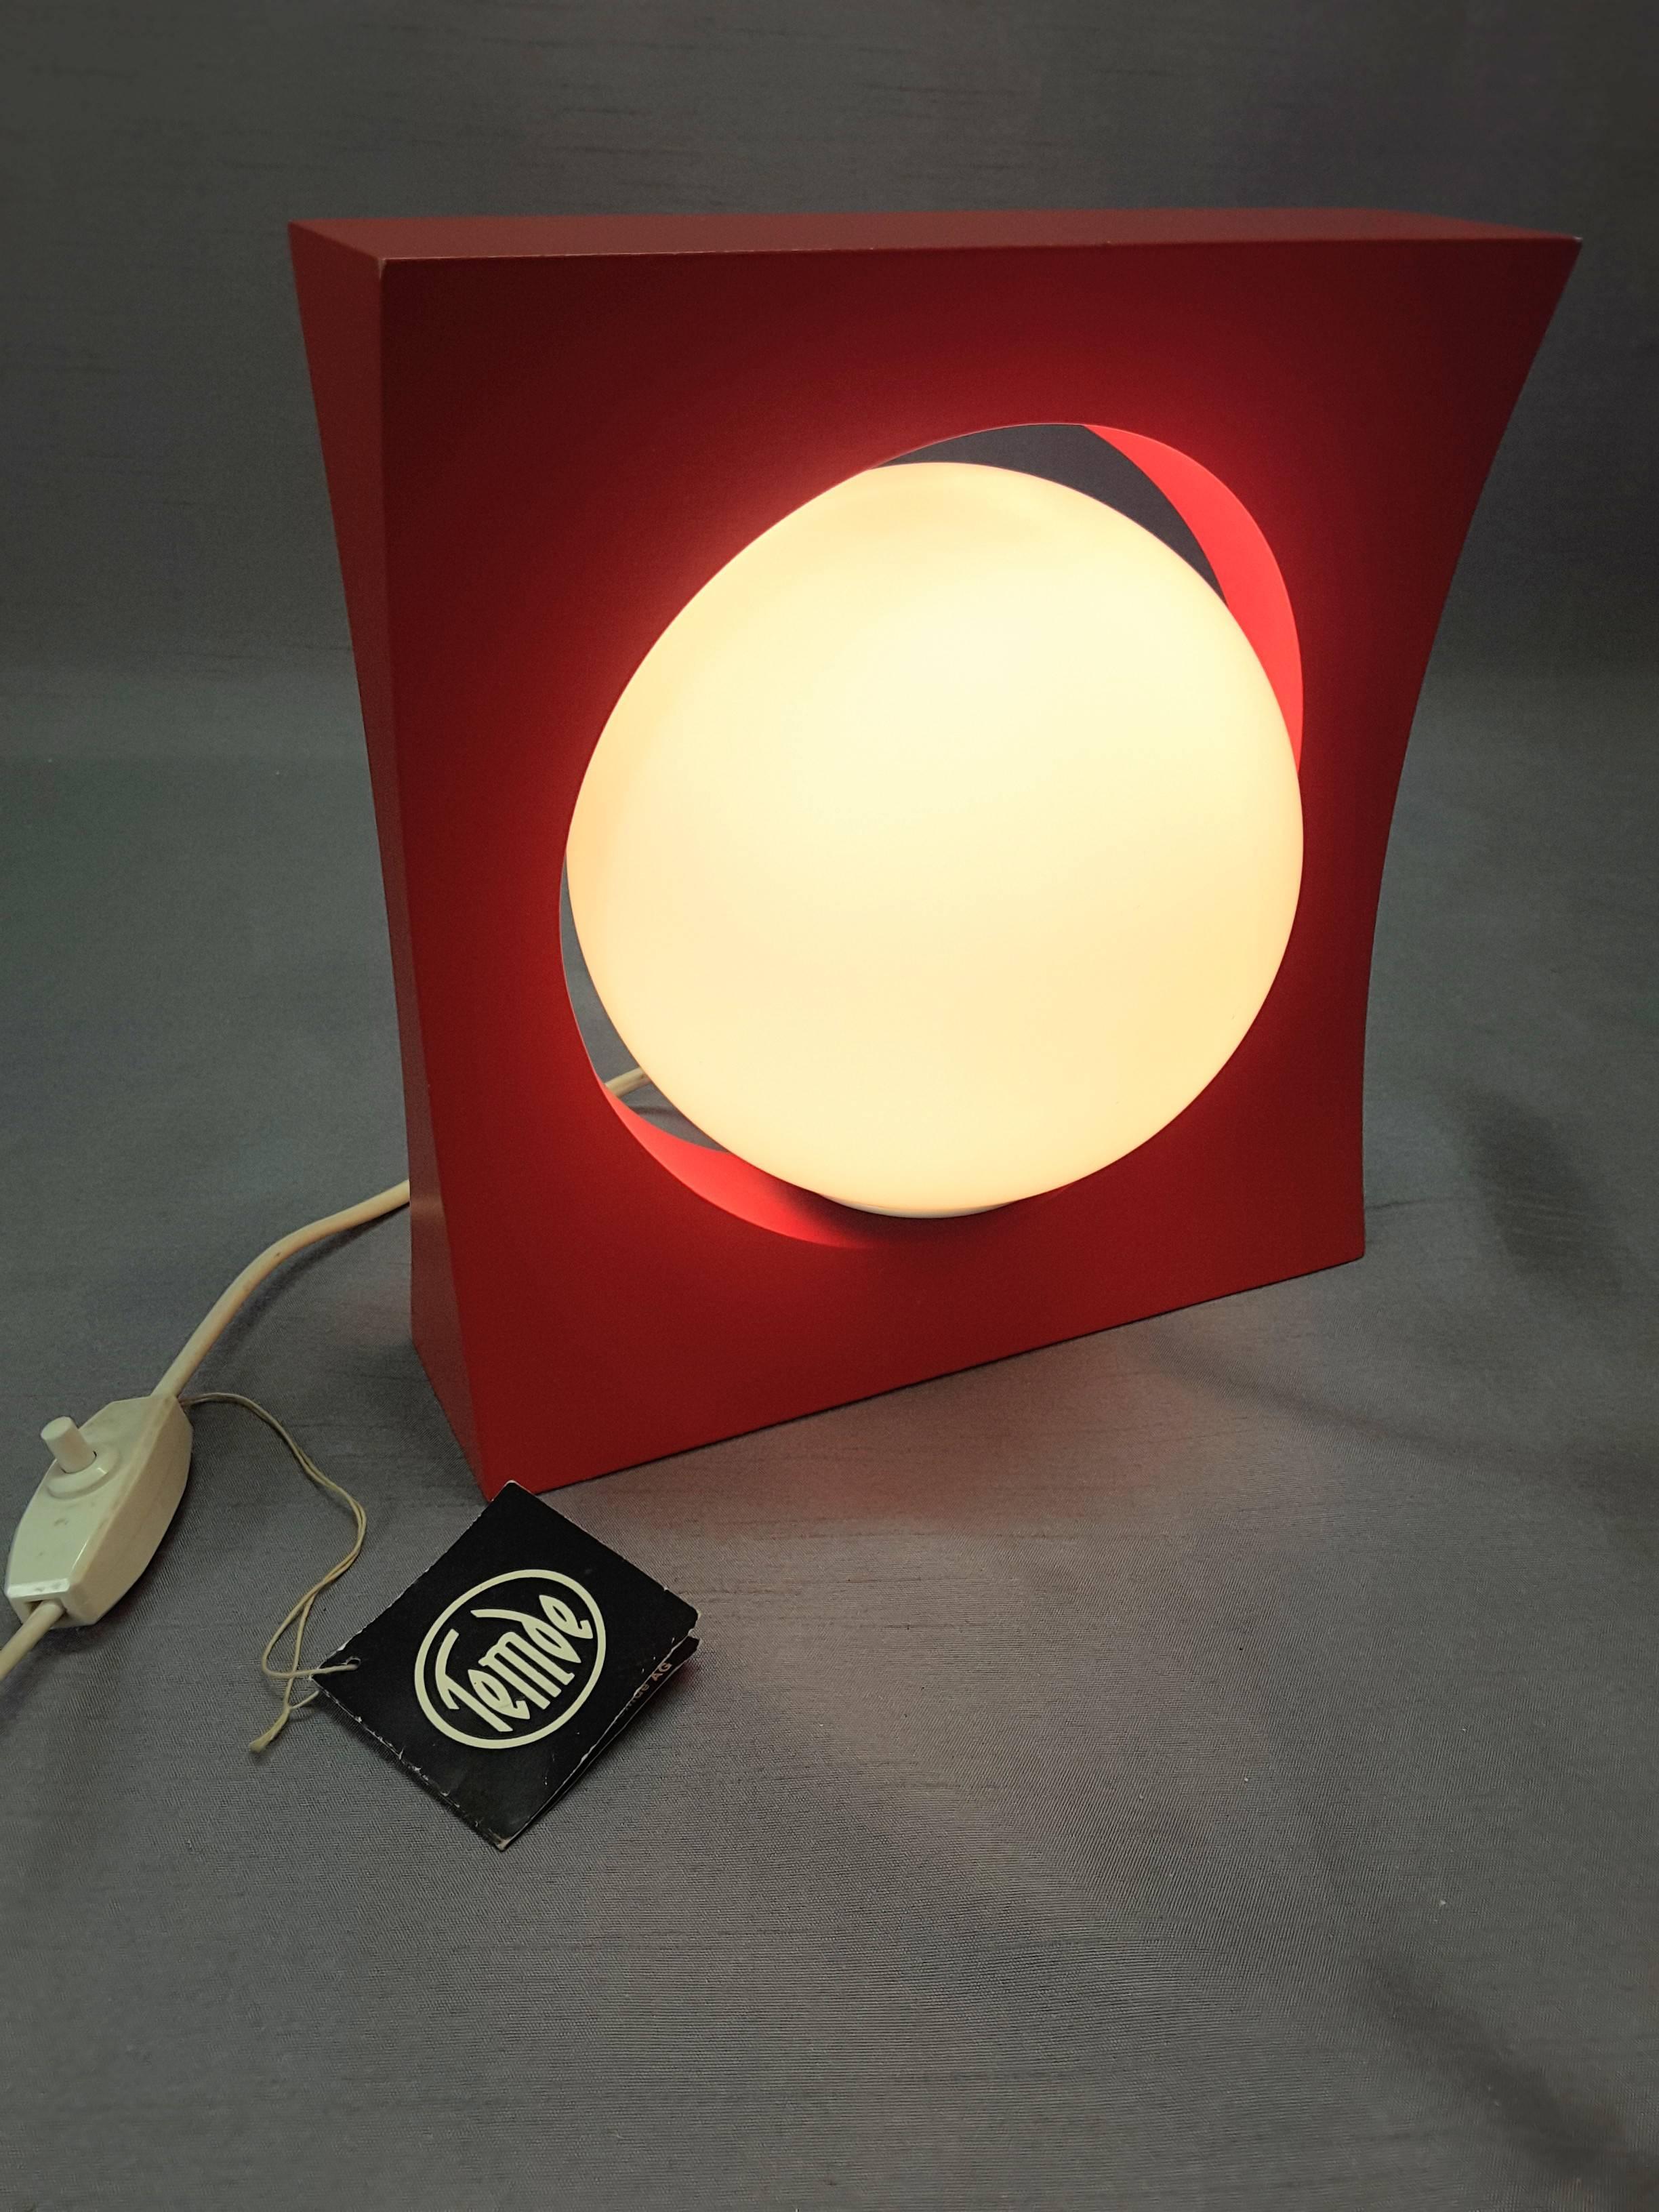 Temde bright red floating ball table and/or wall lamp Mid-Century Modern, made in Germany. Fabulous bright red color and design, the interior ball pivots in all directions, on a white milk glass shade, the lamp has a concave square frame, can be